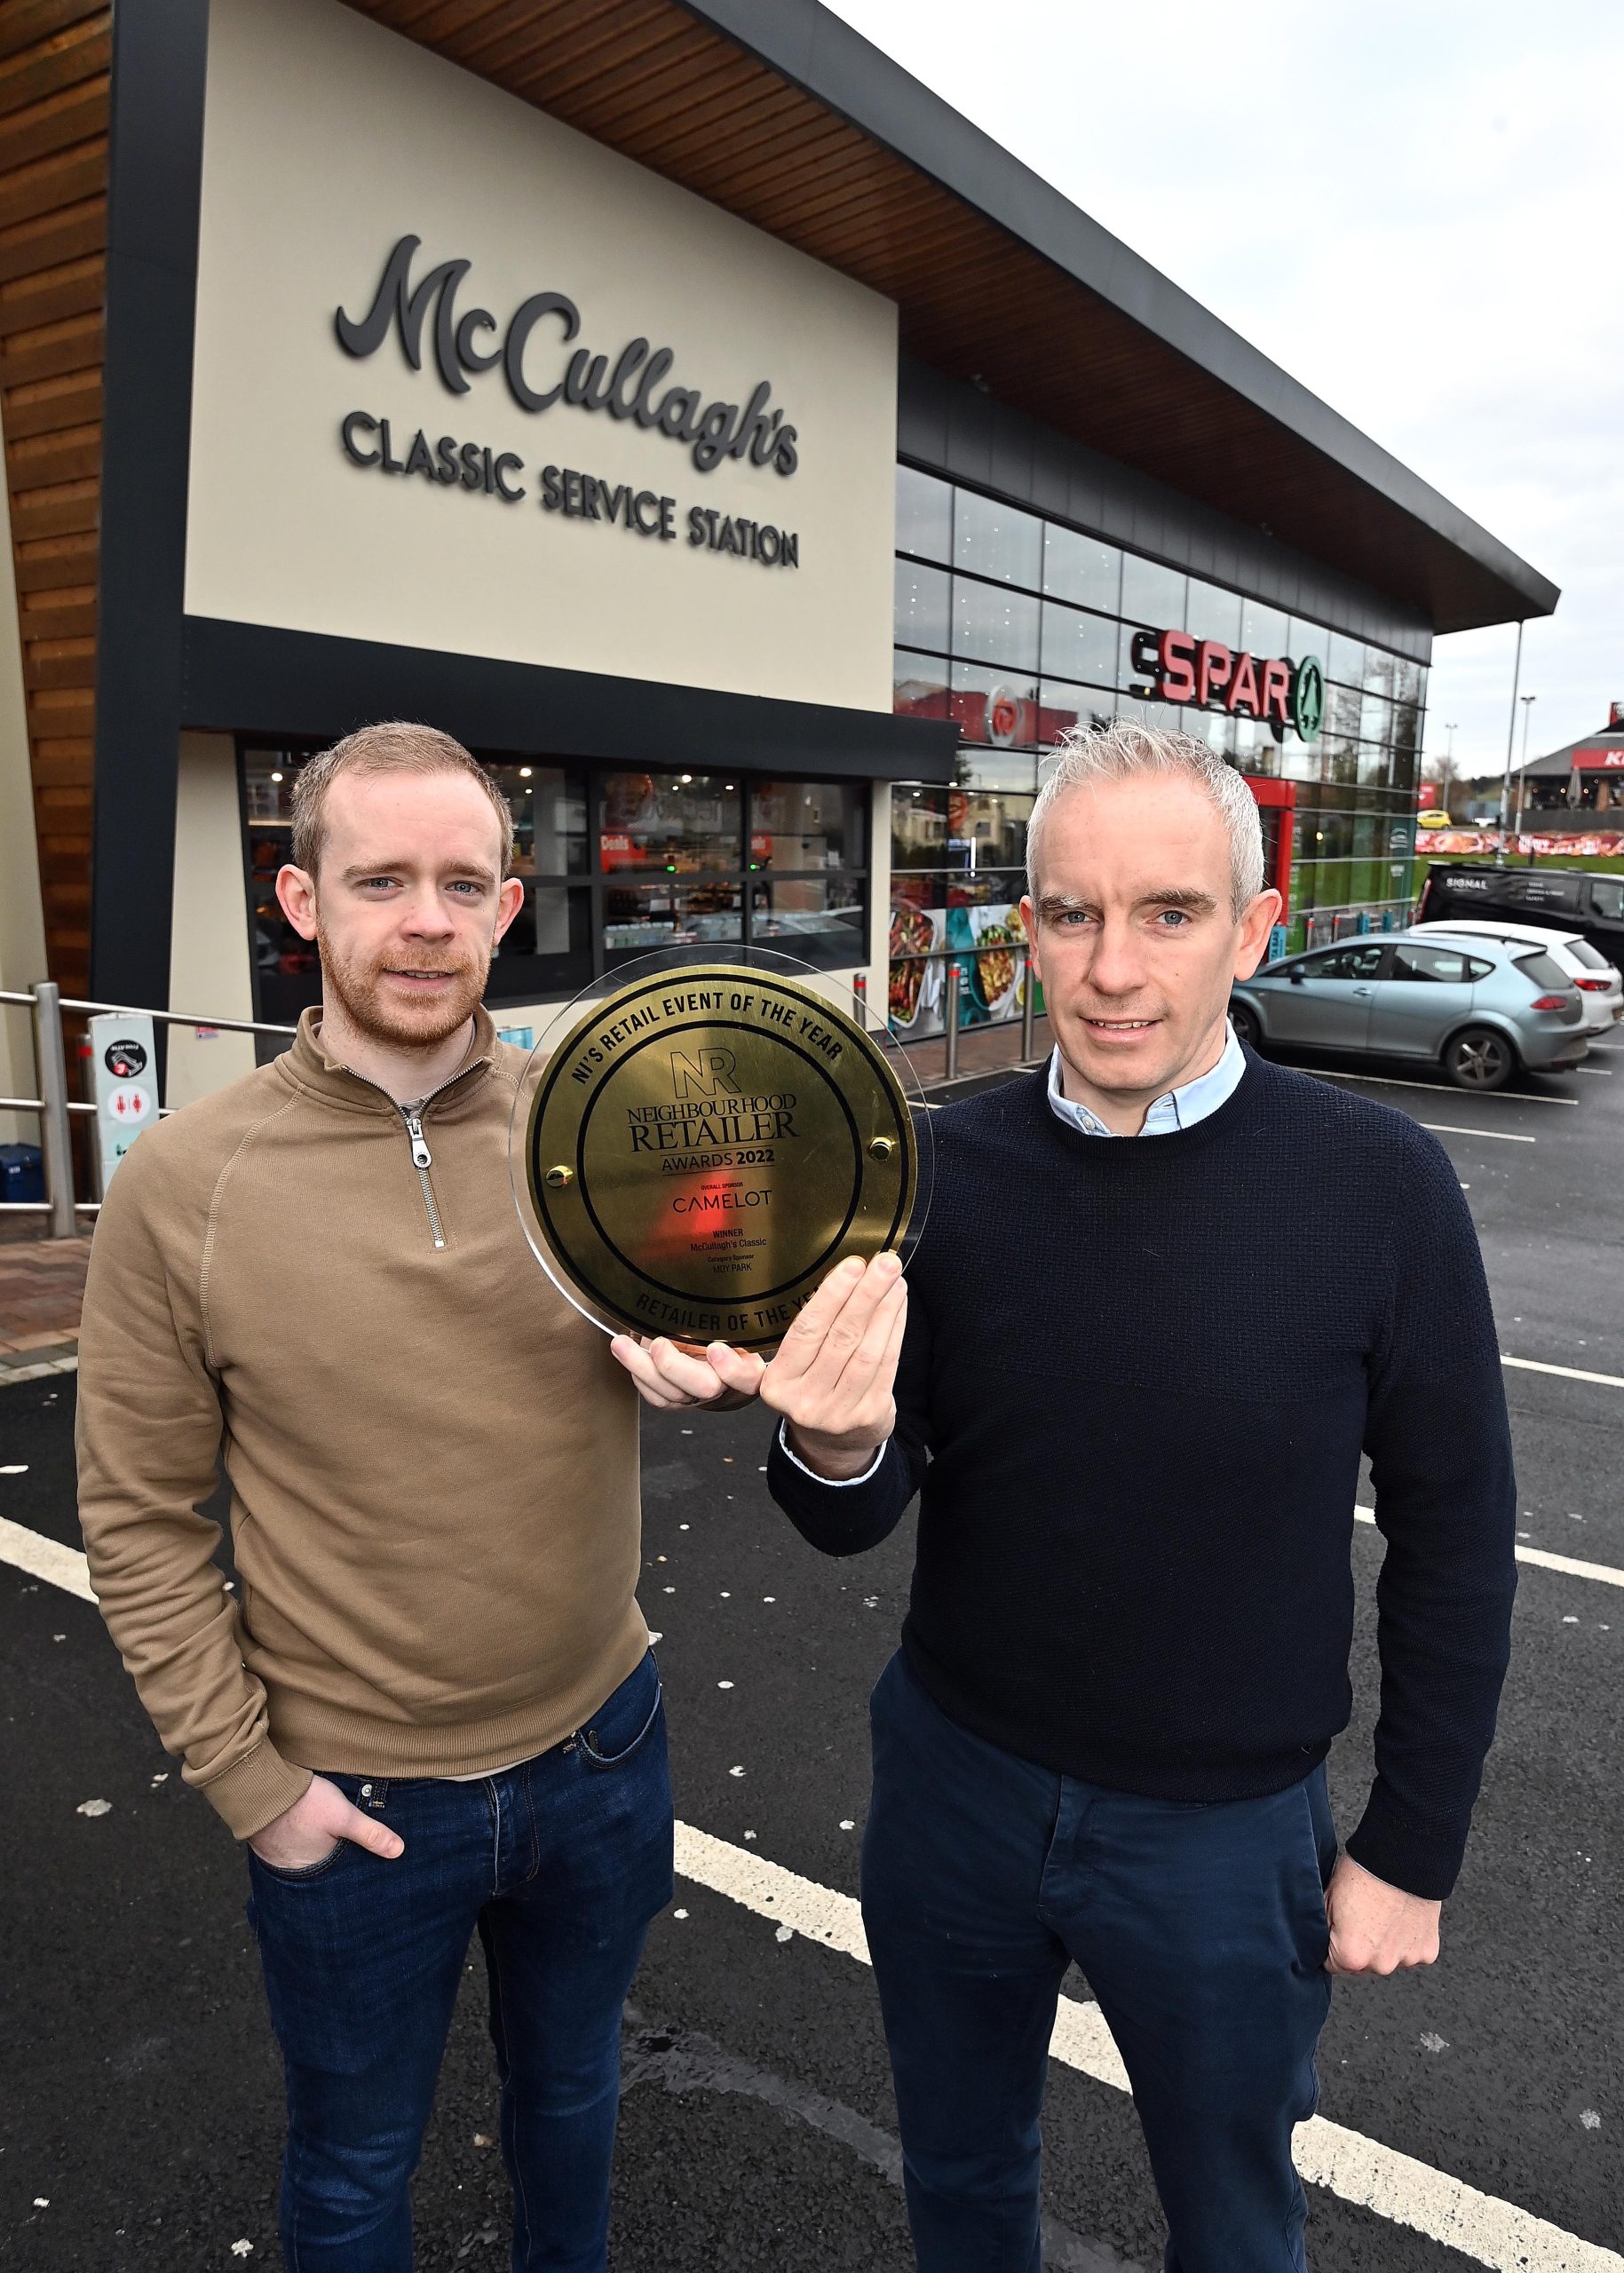 McCullagh’s: Within challenges lie opportunities